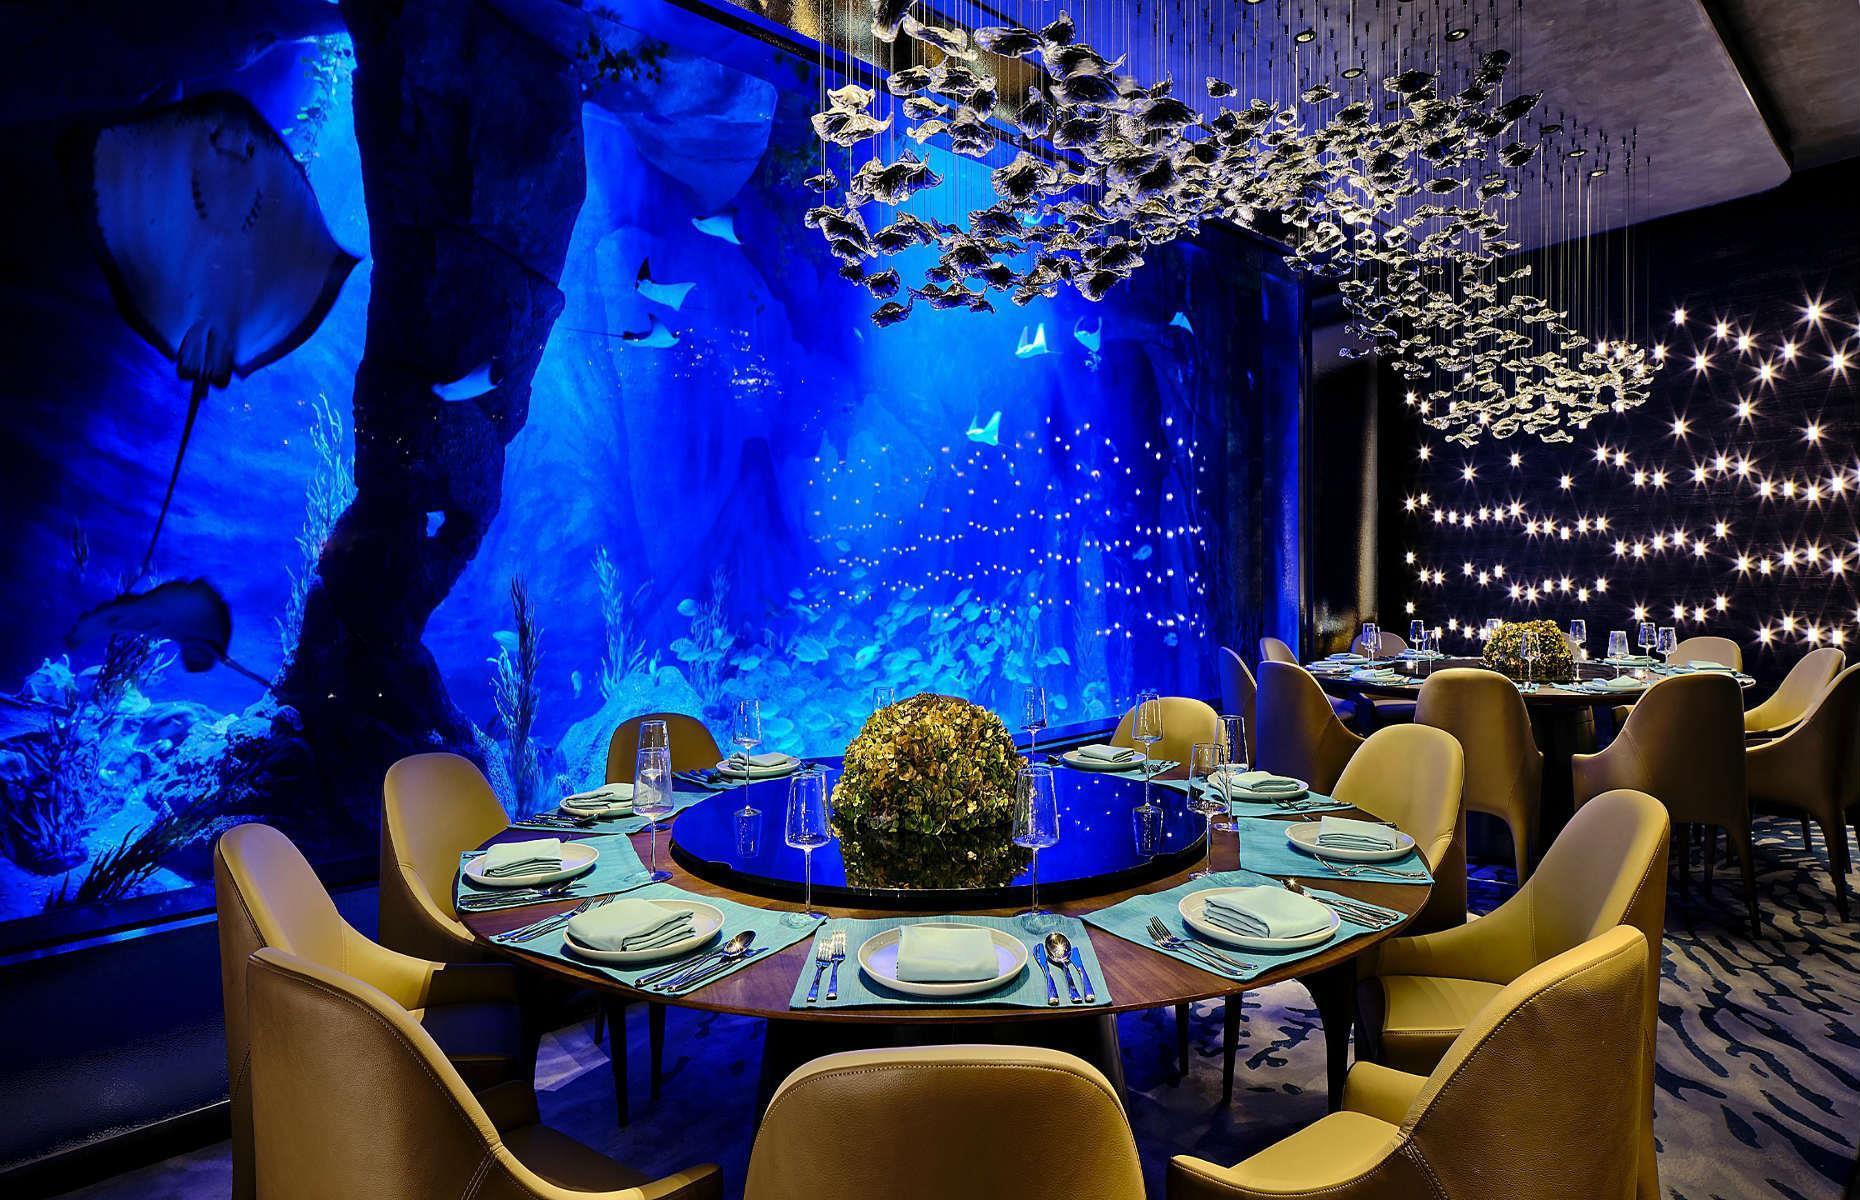 But it’s not just the underwater suite guests who get to ogle the aquarium's mesmerizing tropical marine life up close. The hotel has a tranquil underwater restaurant, Mr Fisher, where guests can immerse themselves in the wonders of the ocean. Diners sit next to full-length glass windows that look out onto the pretty corals and swirling fish as they feast on (yep, you guessed it) top-quality seafood.